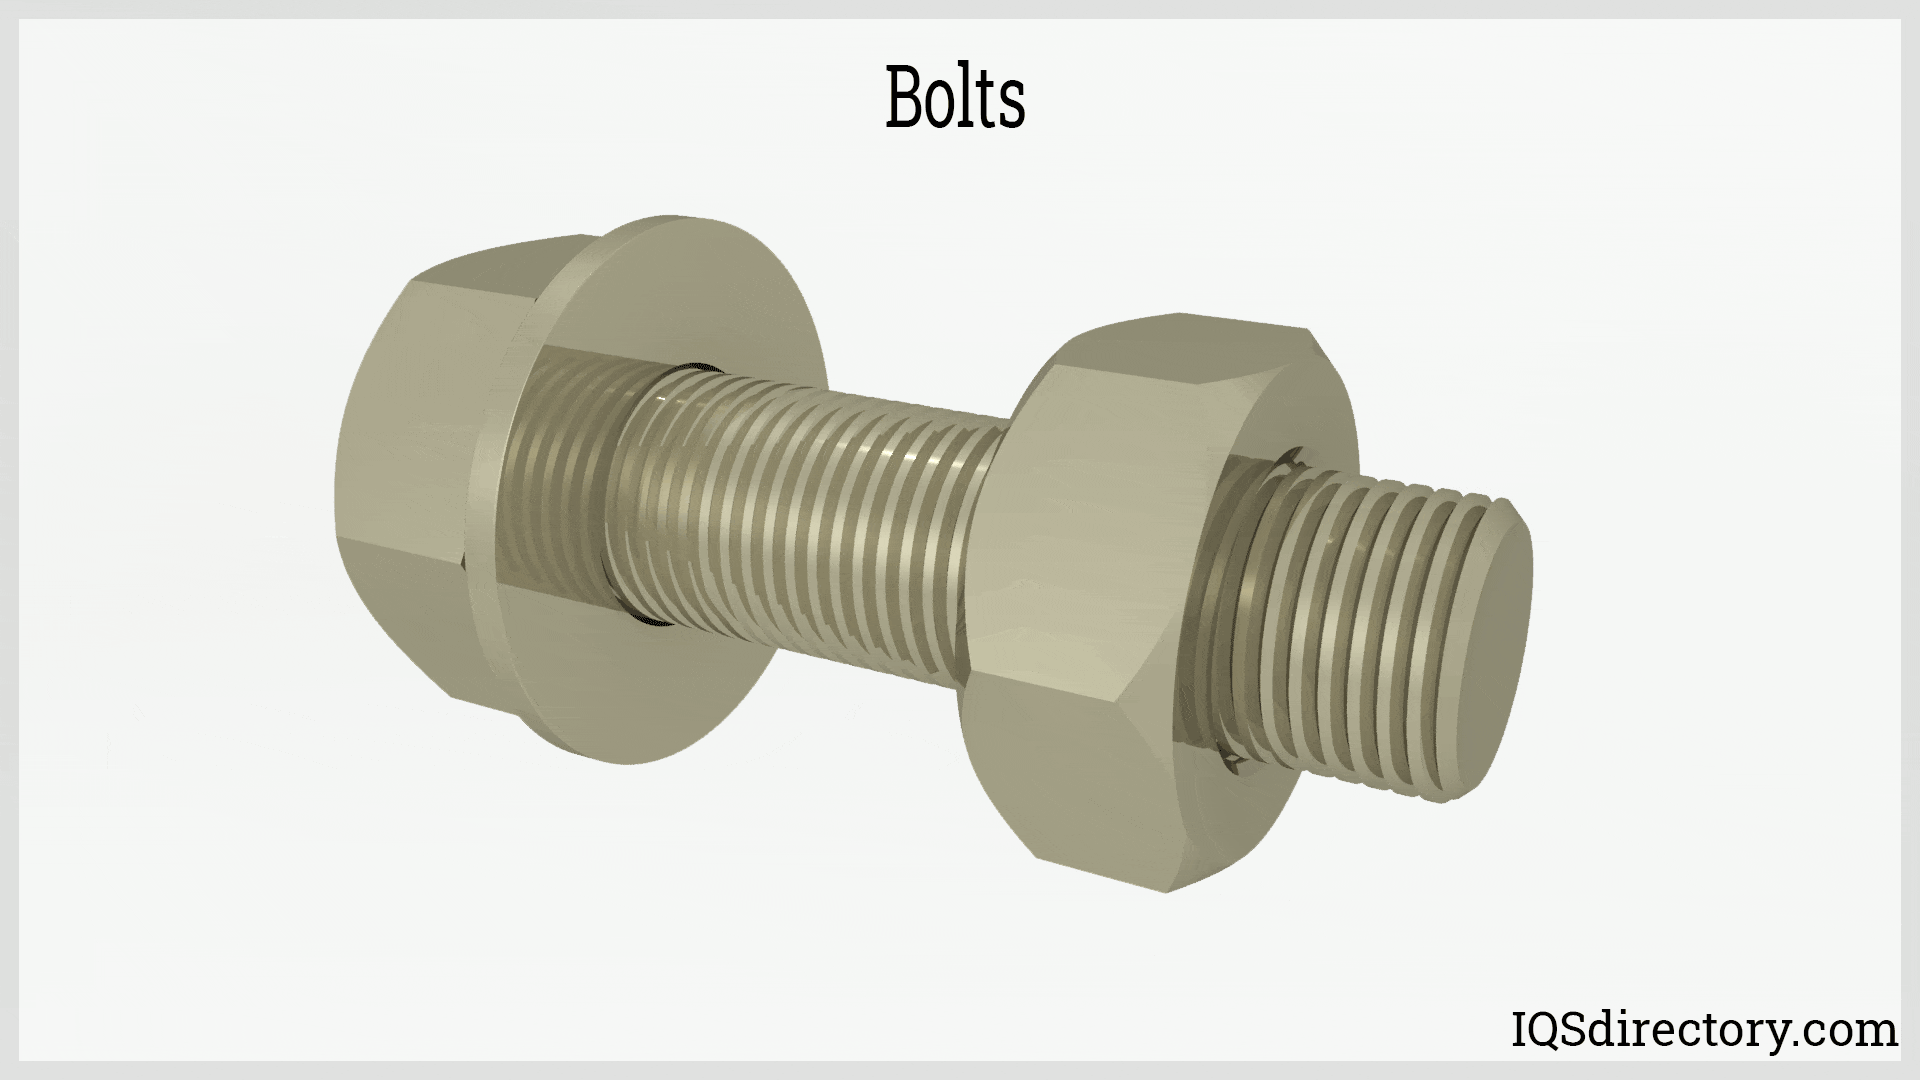 Types Of Bolts